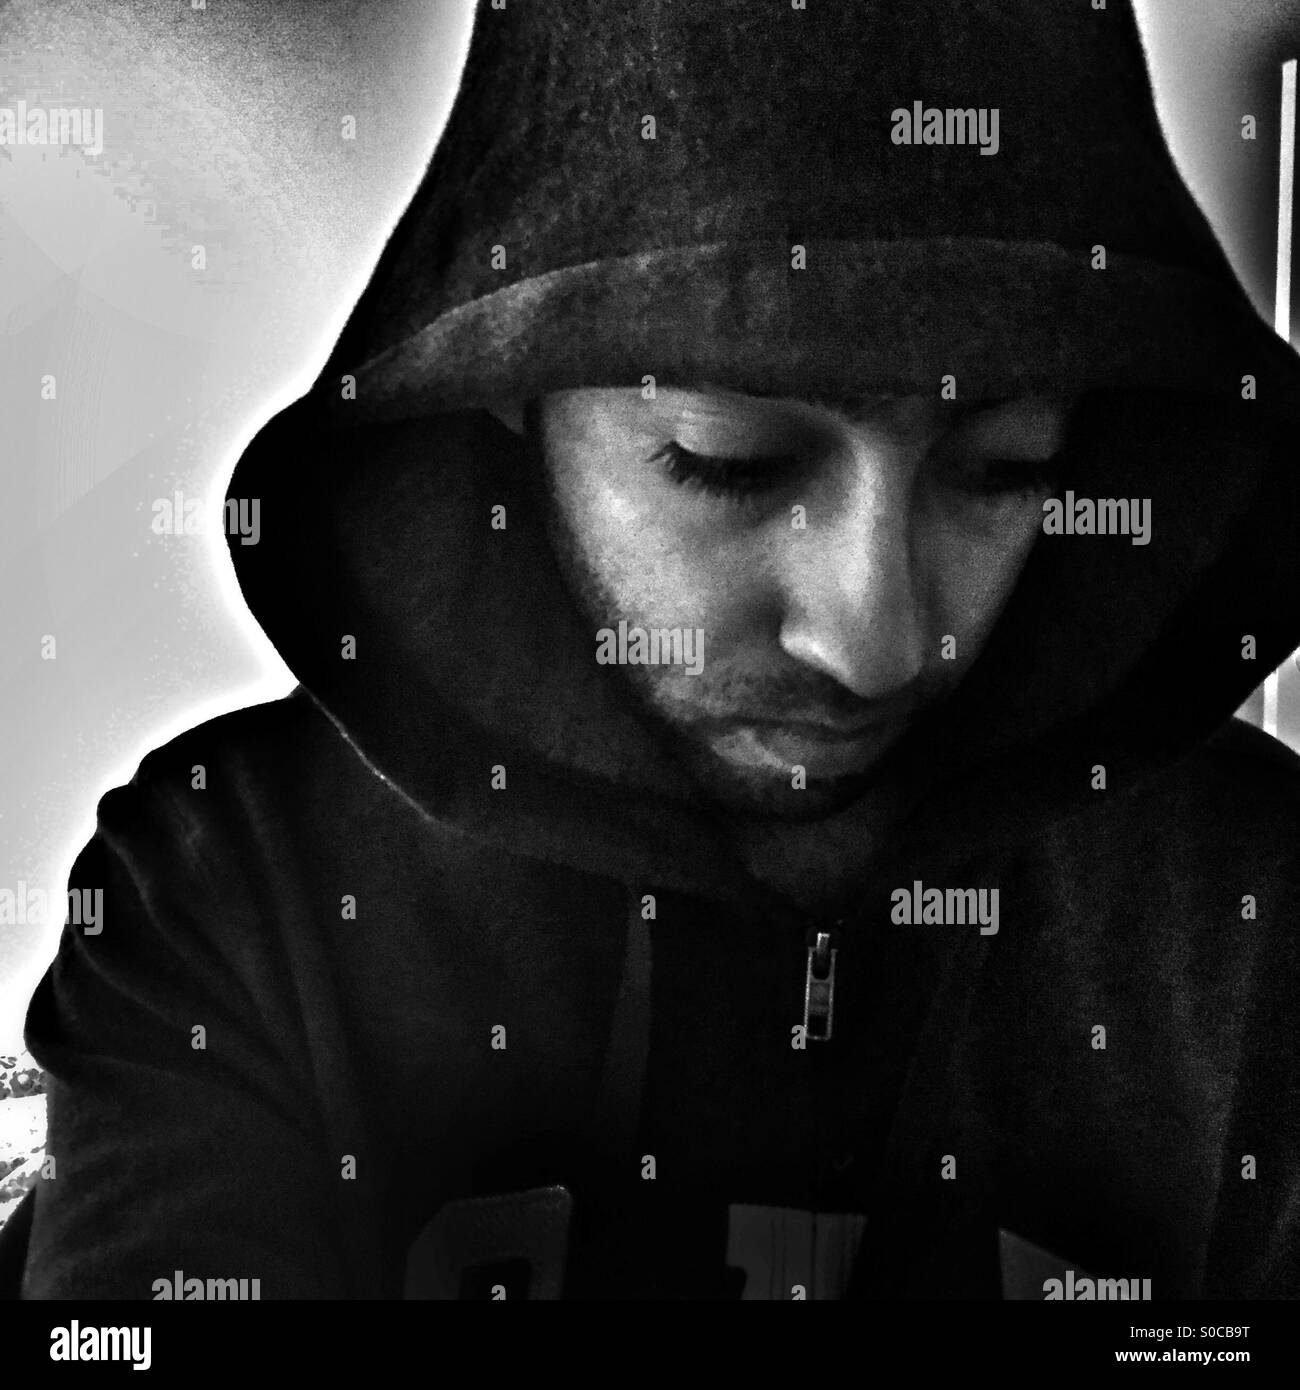 A guy wearing a hoodie looking down Stock Photo